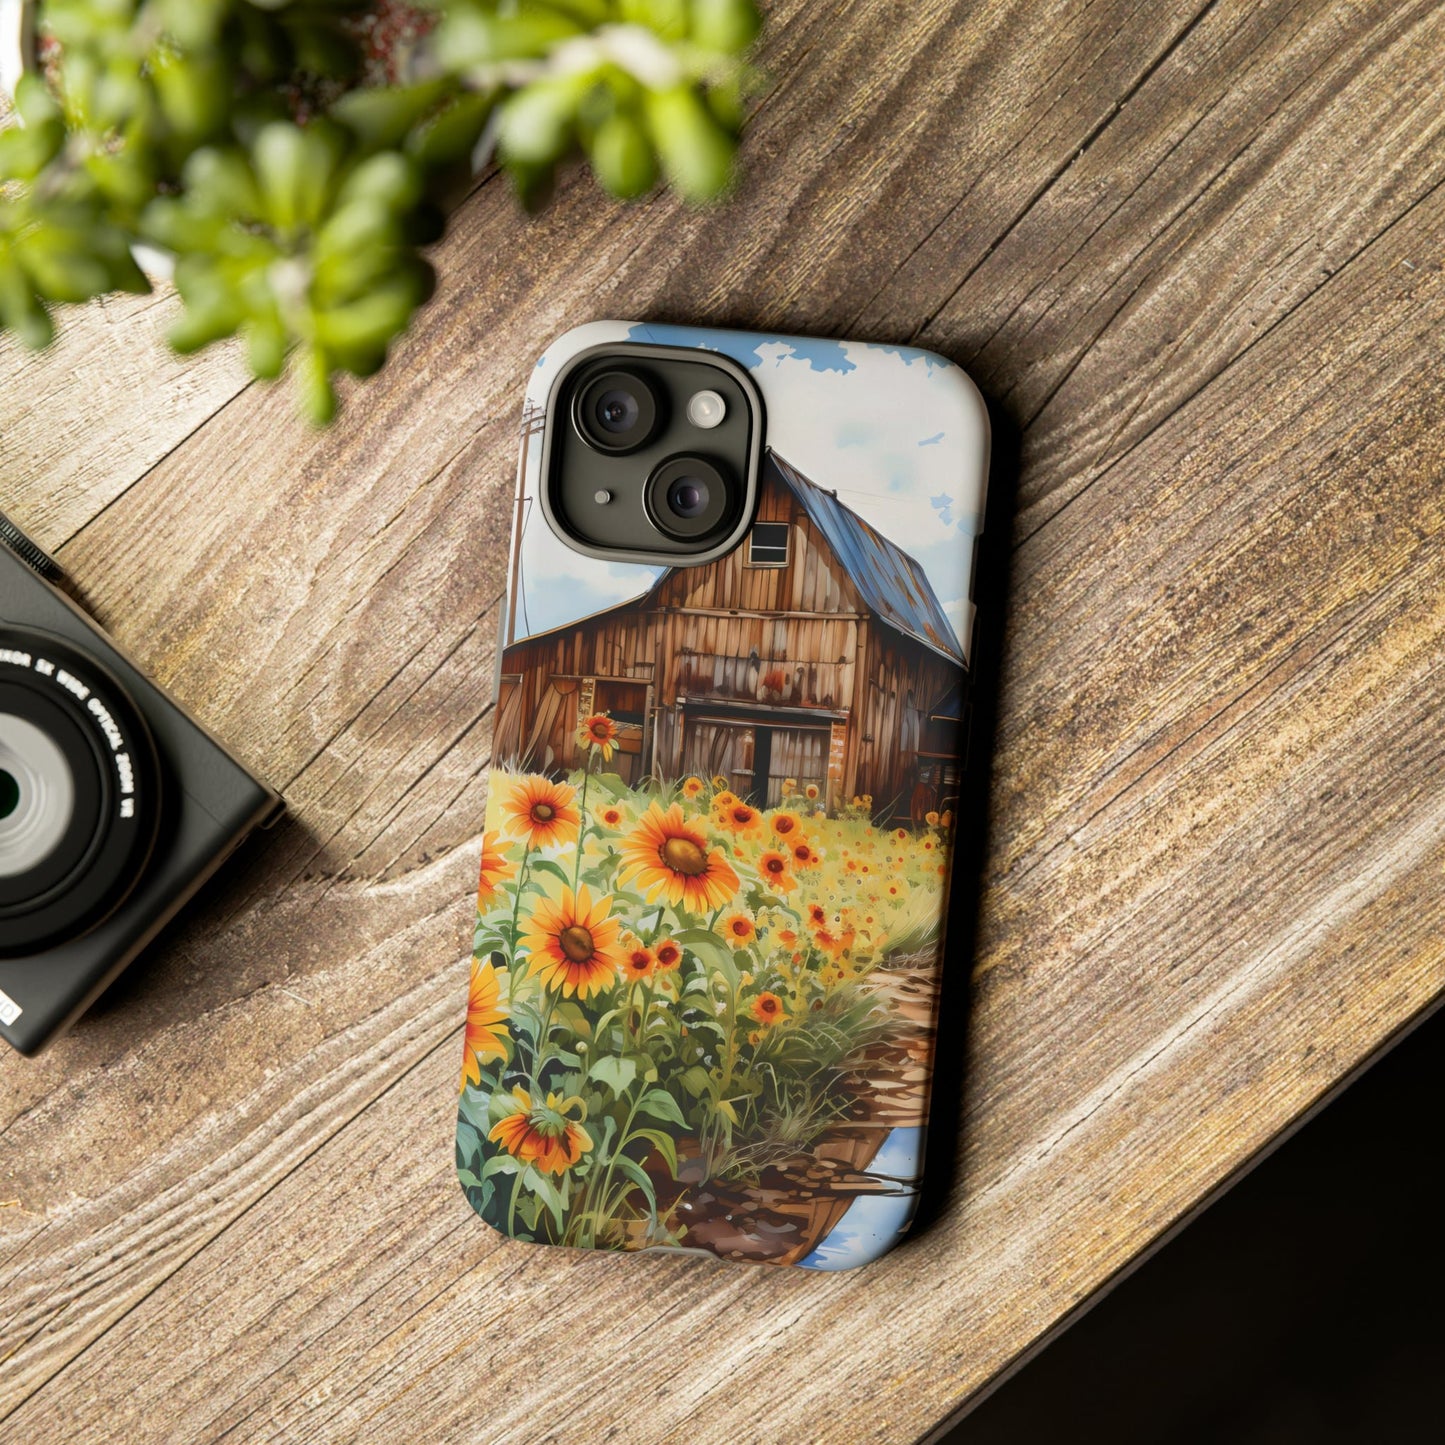 Sunflower iPhone 15 Case: Rustic, Barnyard, Cute Cover, Floral Phone Case, Farm Style, Western Themed. For Her/Him! Fits Pro, Plus, Max. - BOGO Cases